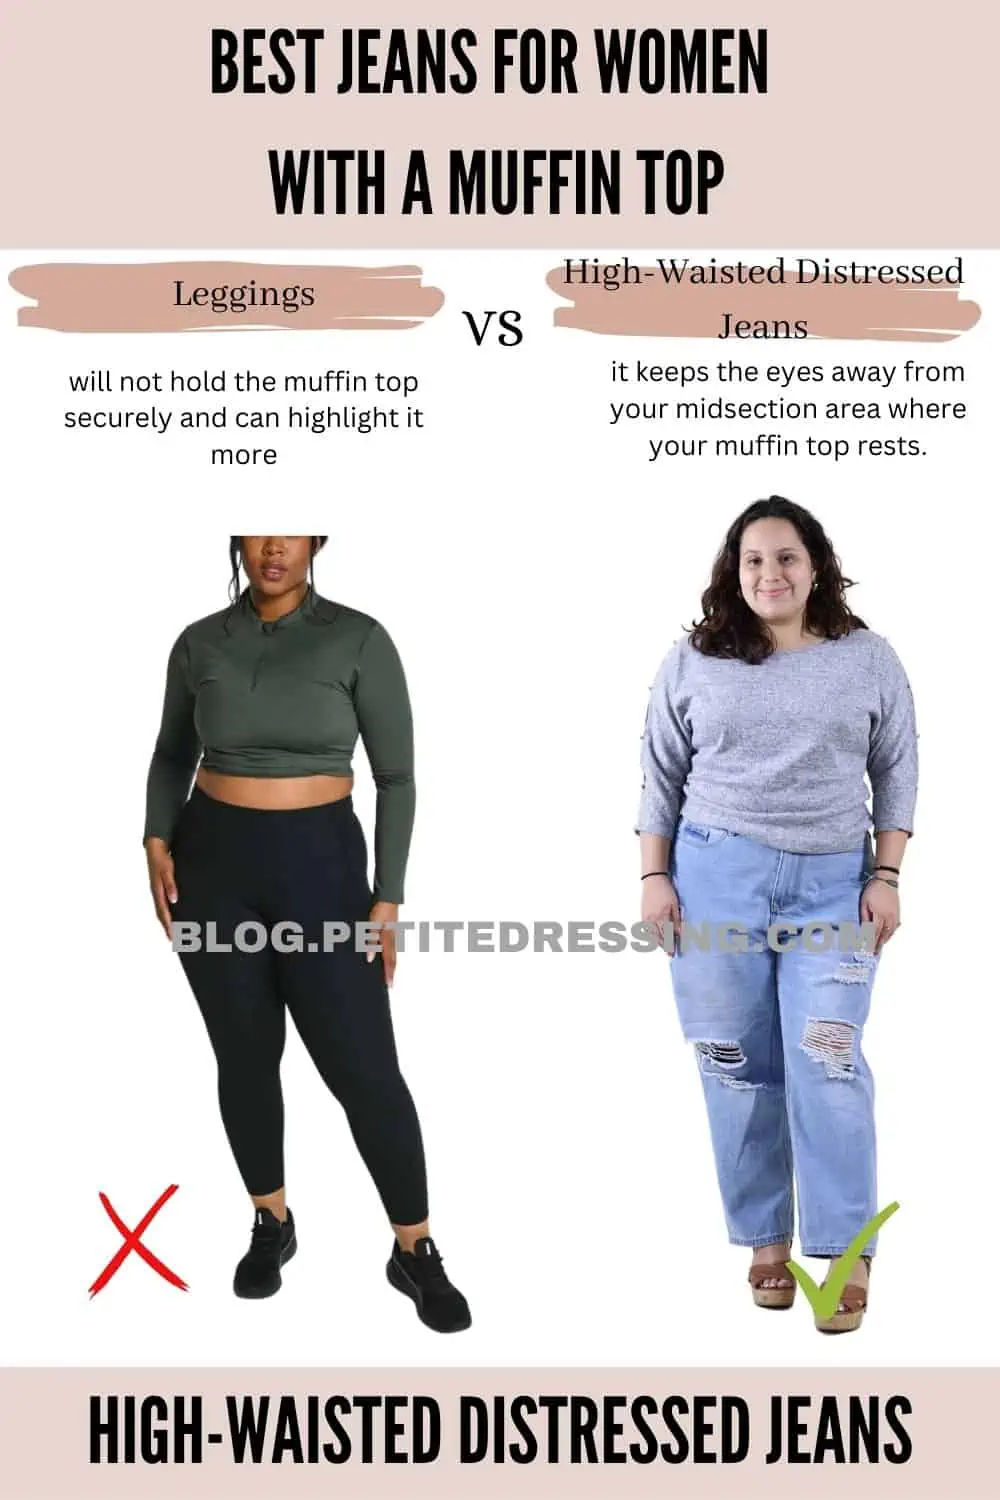 The Complete Jeans Guide for Women with Muffin Top - Petite Dressing